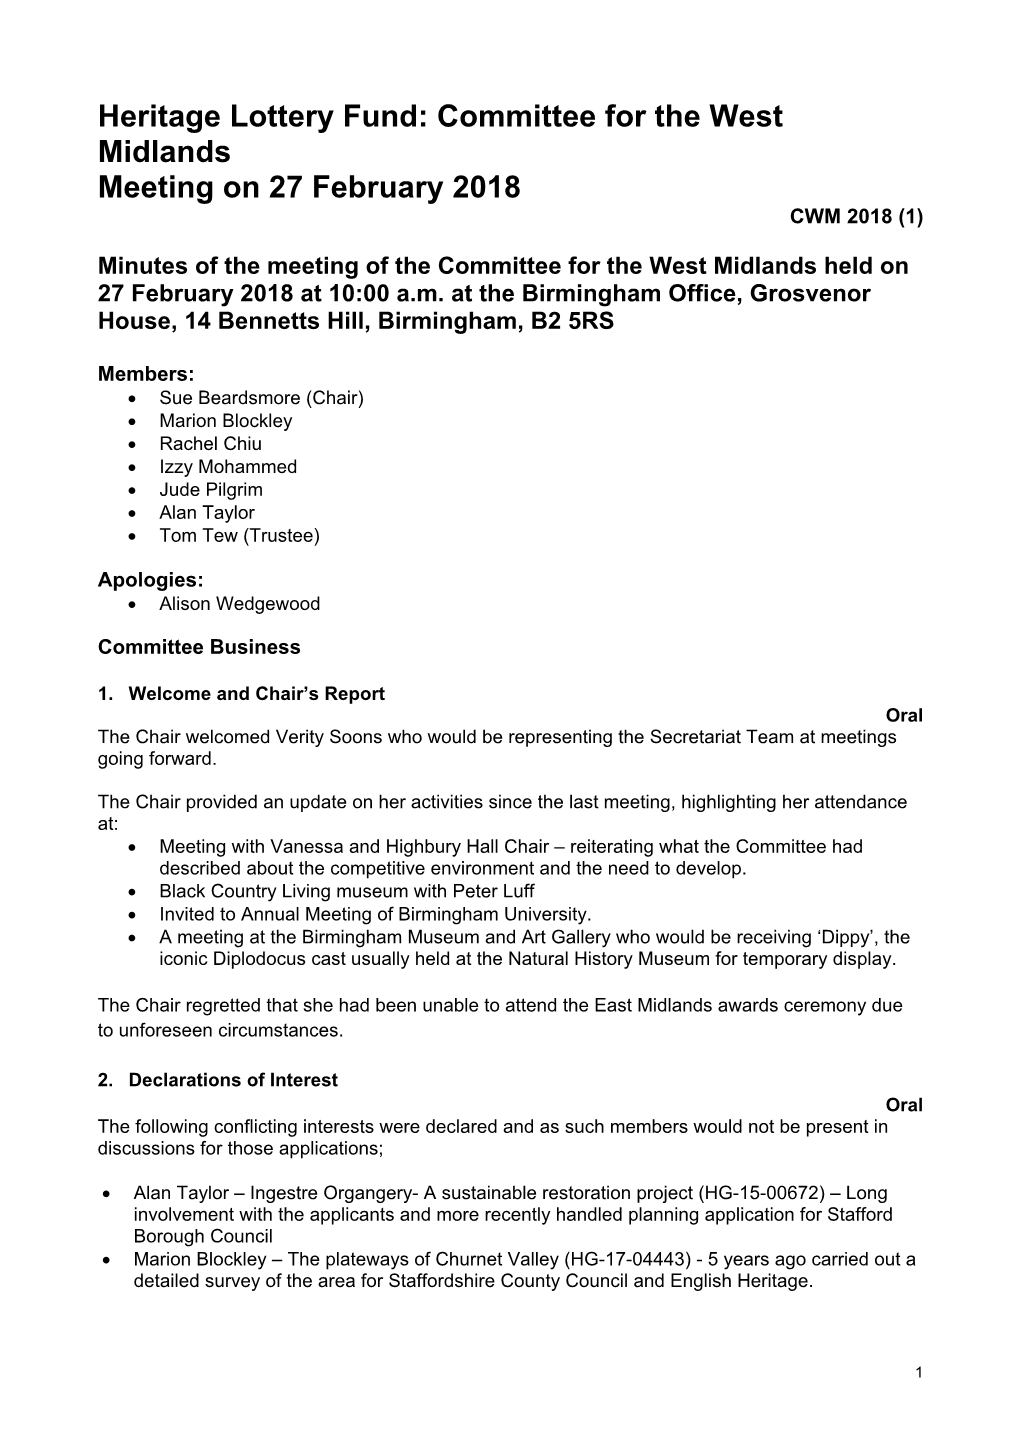 Committee for the West Midlands Minutes of the February Meeting